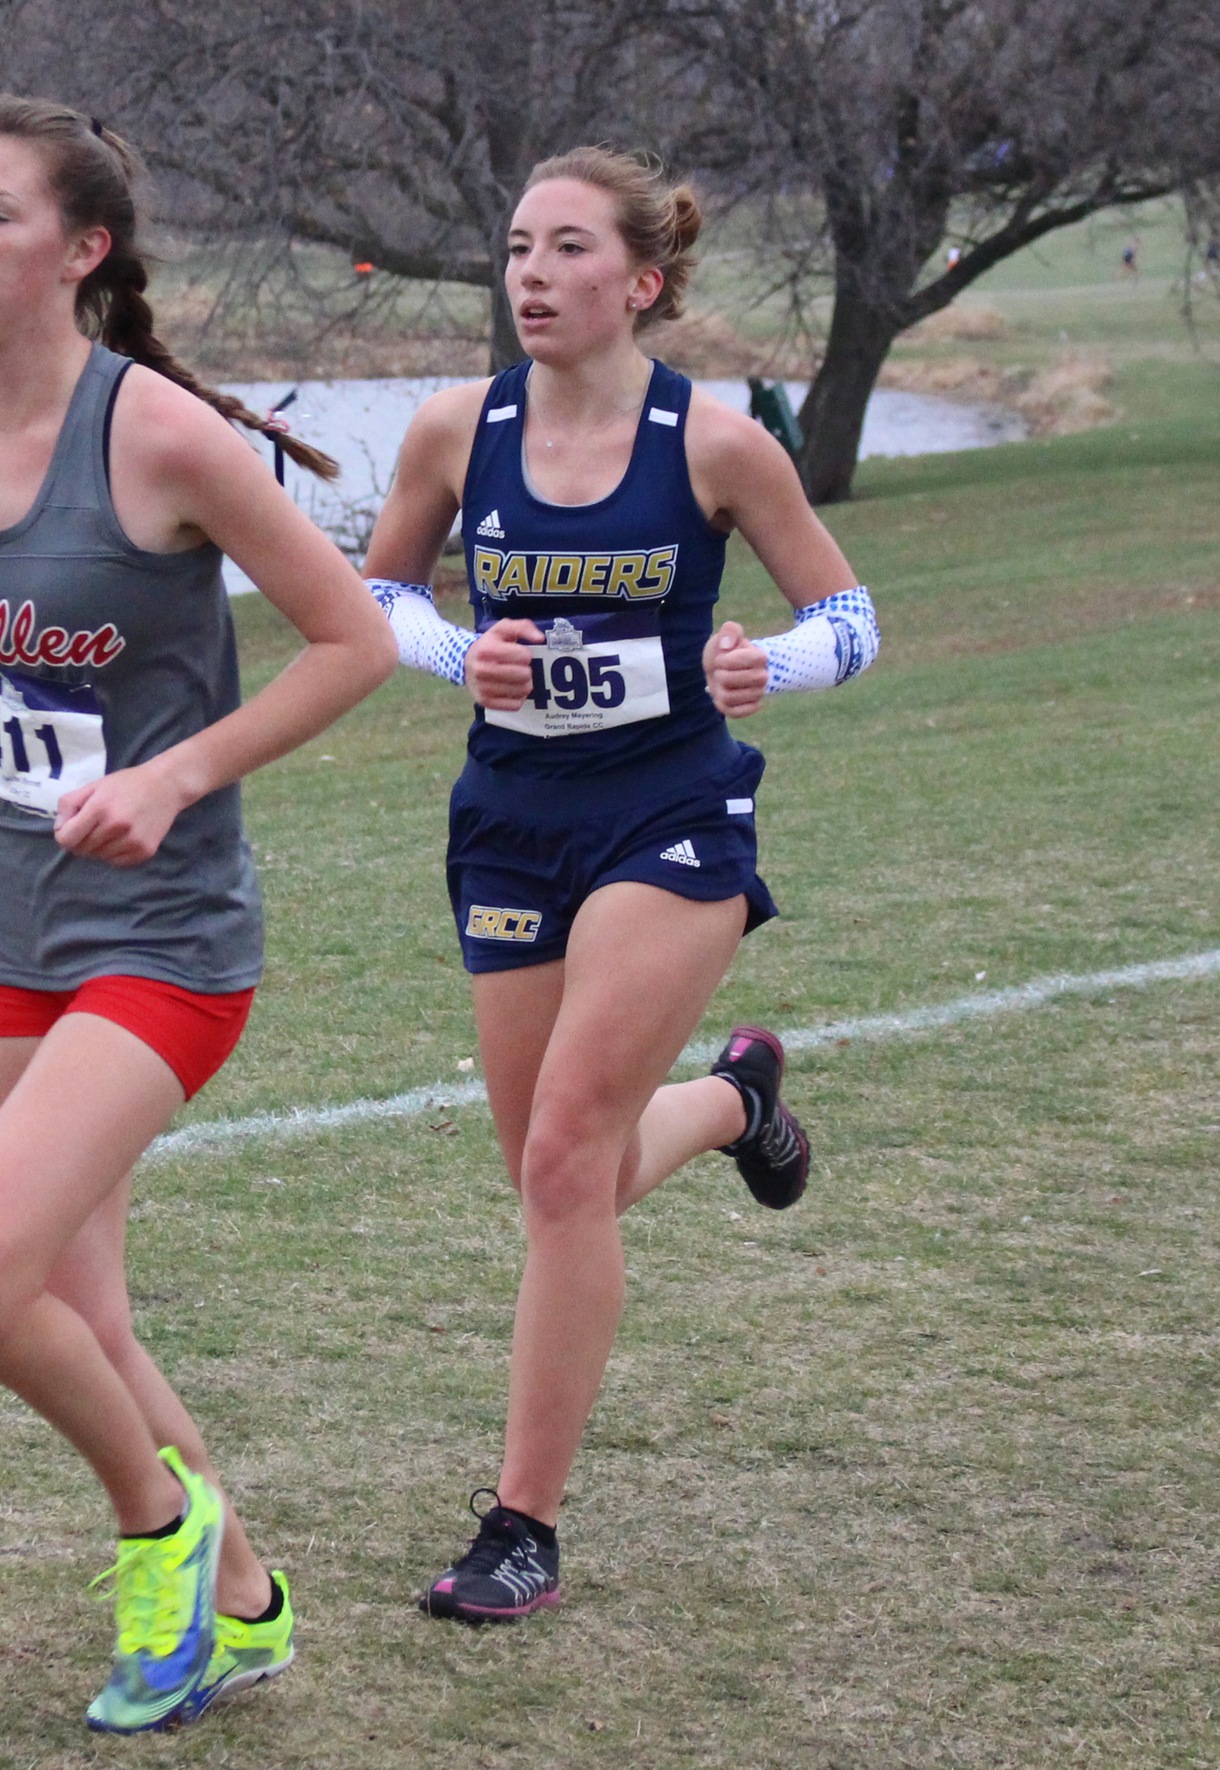 Grand Rapids Audrey Meyering runs to an eighth place finish at the NJCAA Division II National in Fort Dodge, IA.